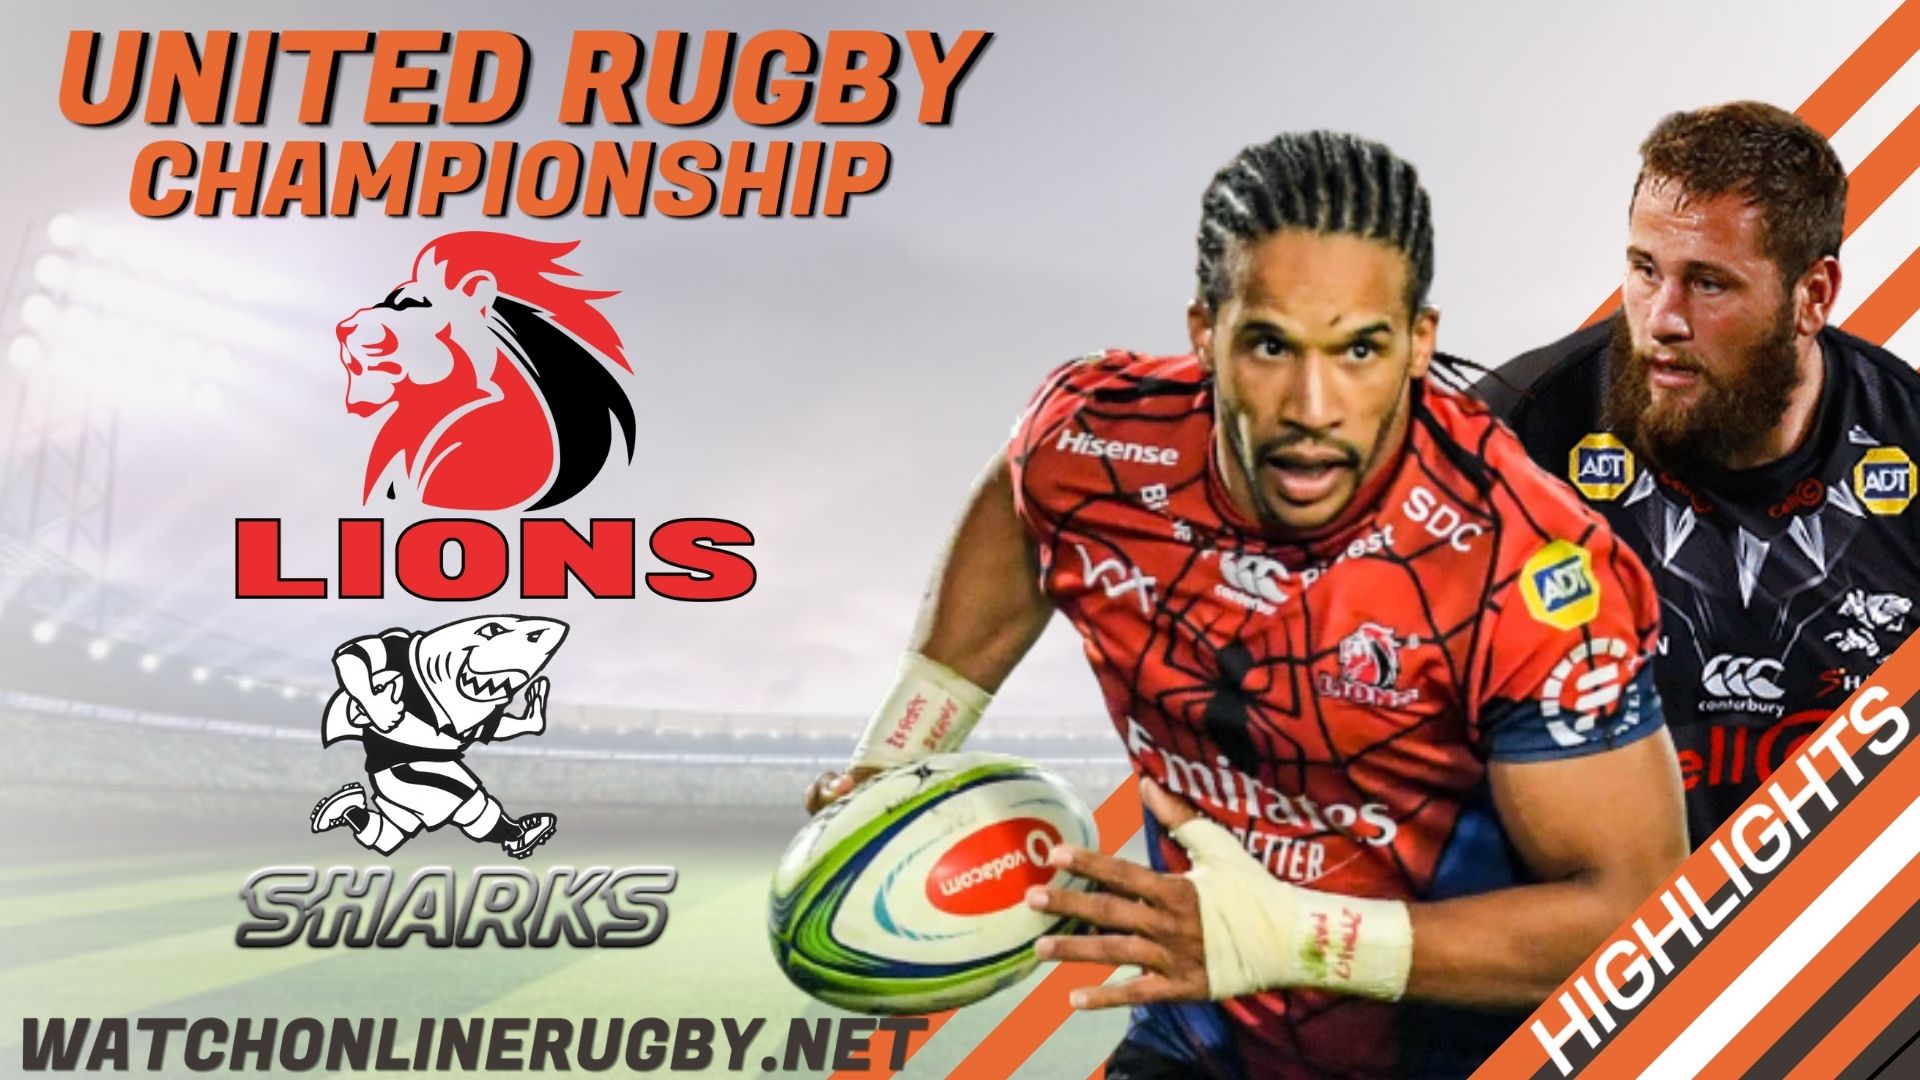 Lions Vs Sharks United Rugby Championship 2022 RD 10